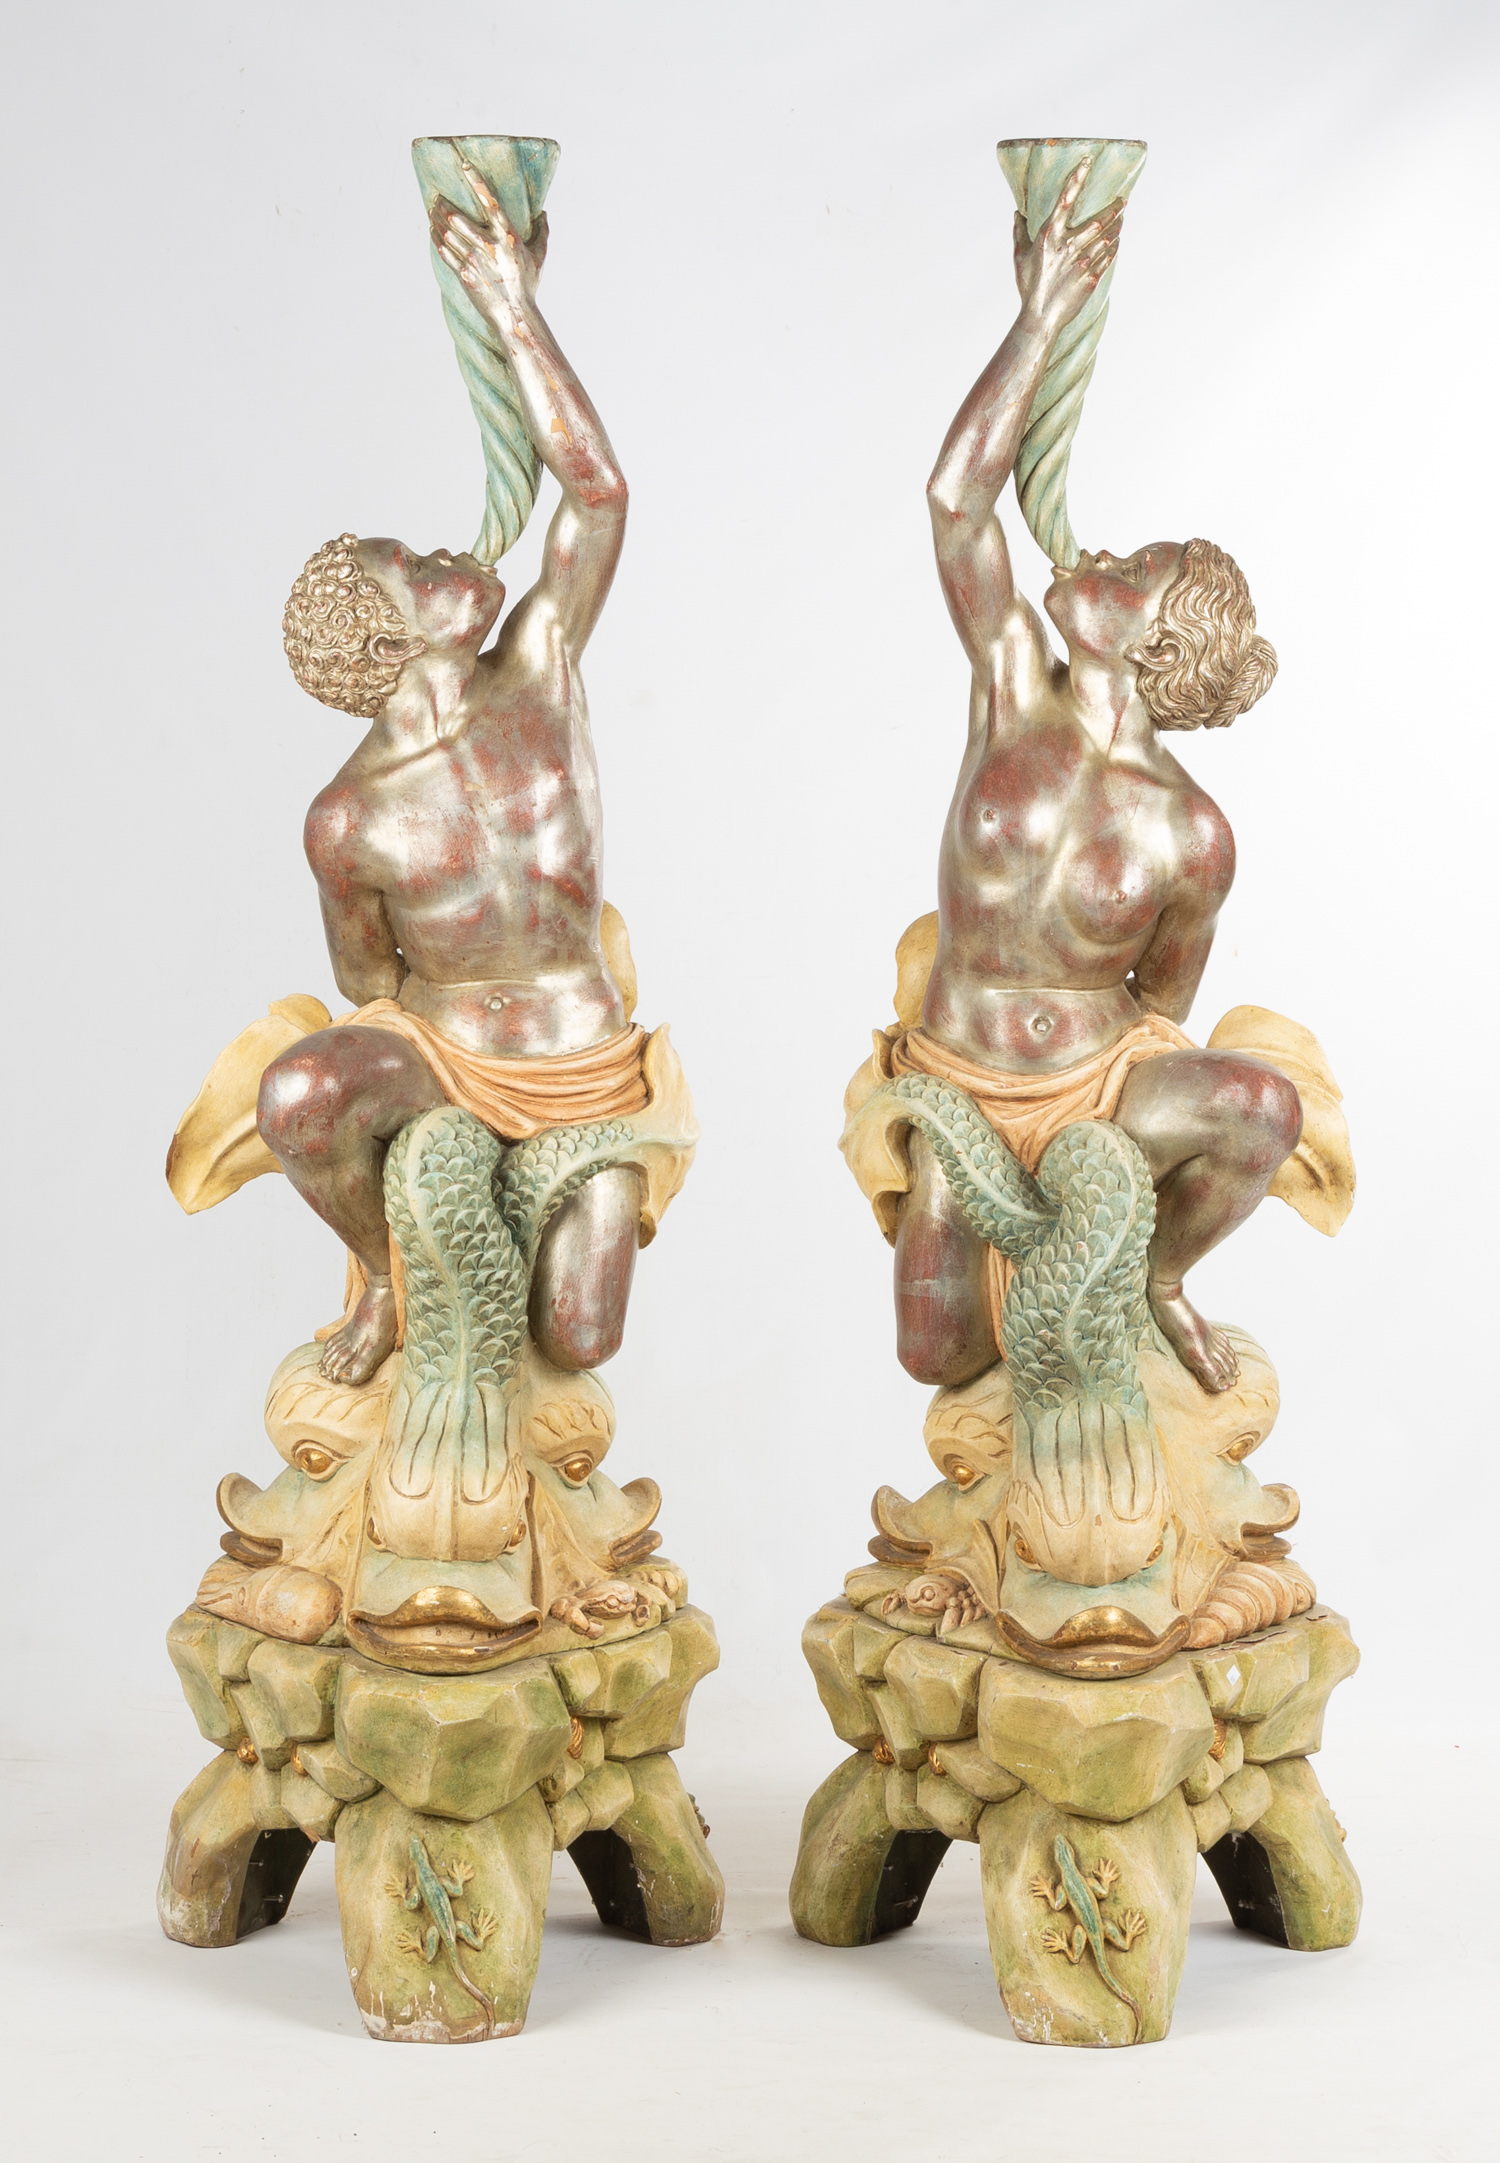 PAIR OF CARVED VENETIAN STYLE GROTTO